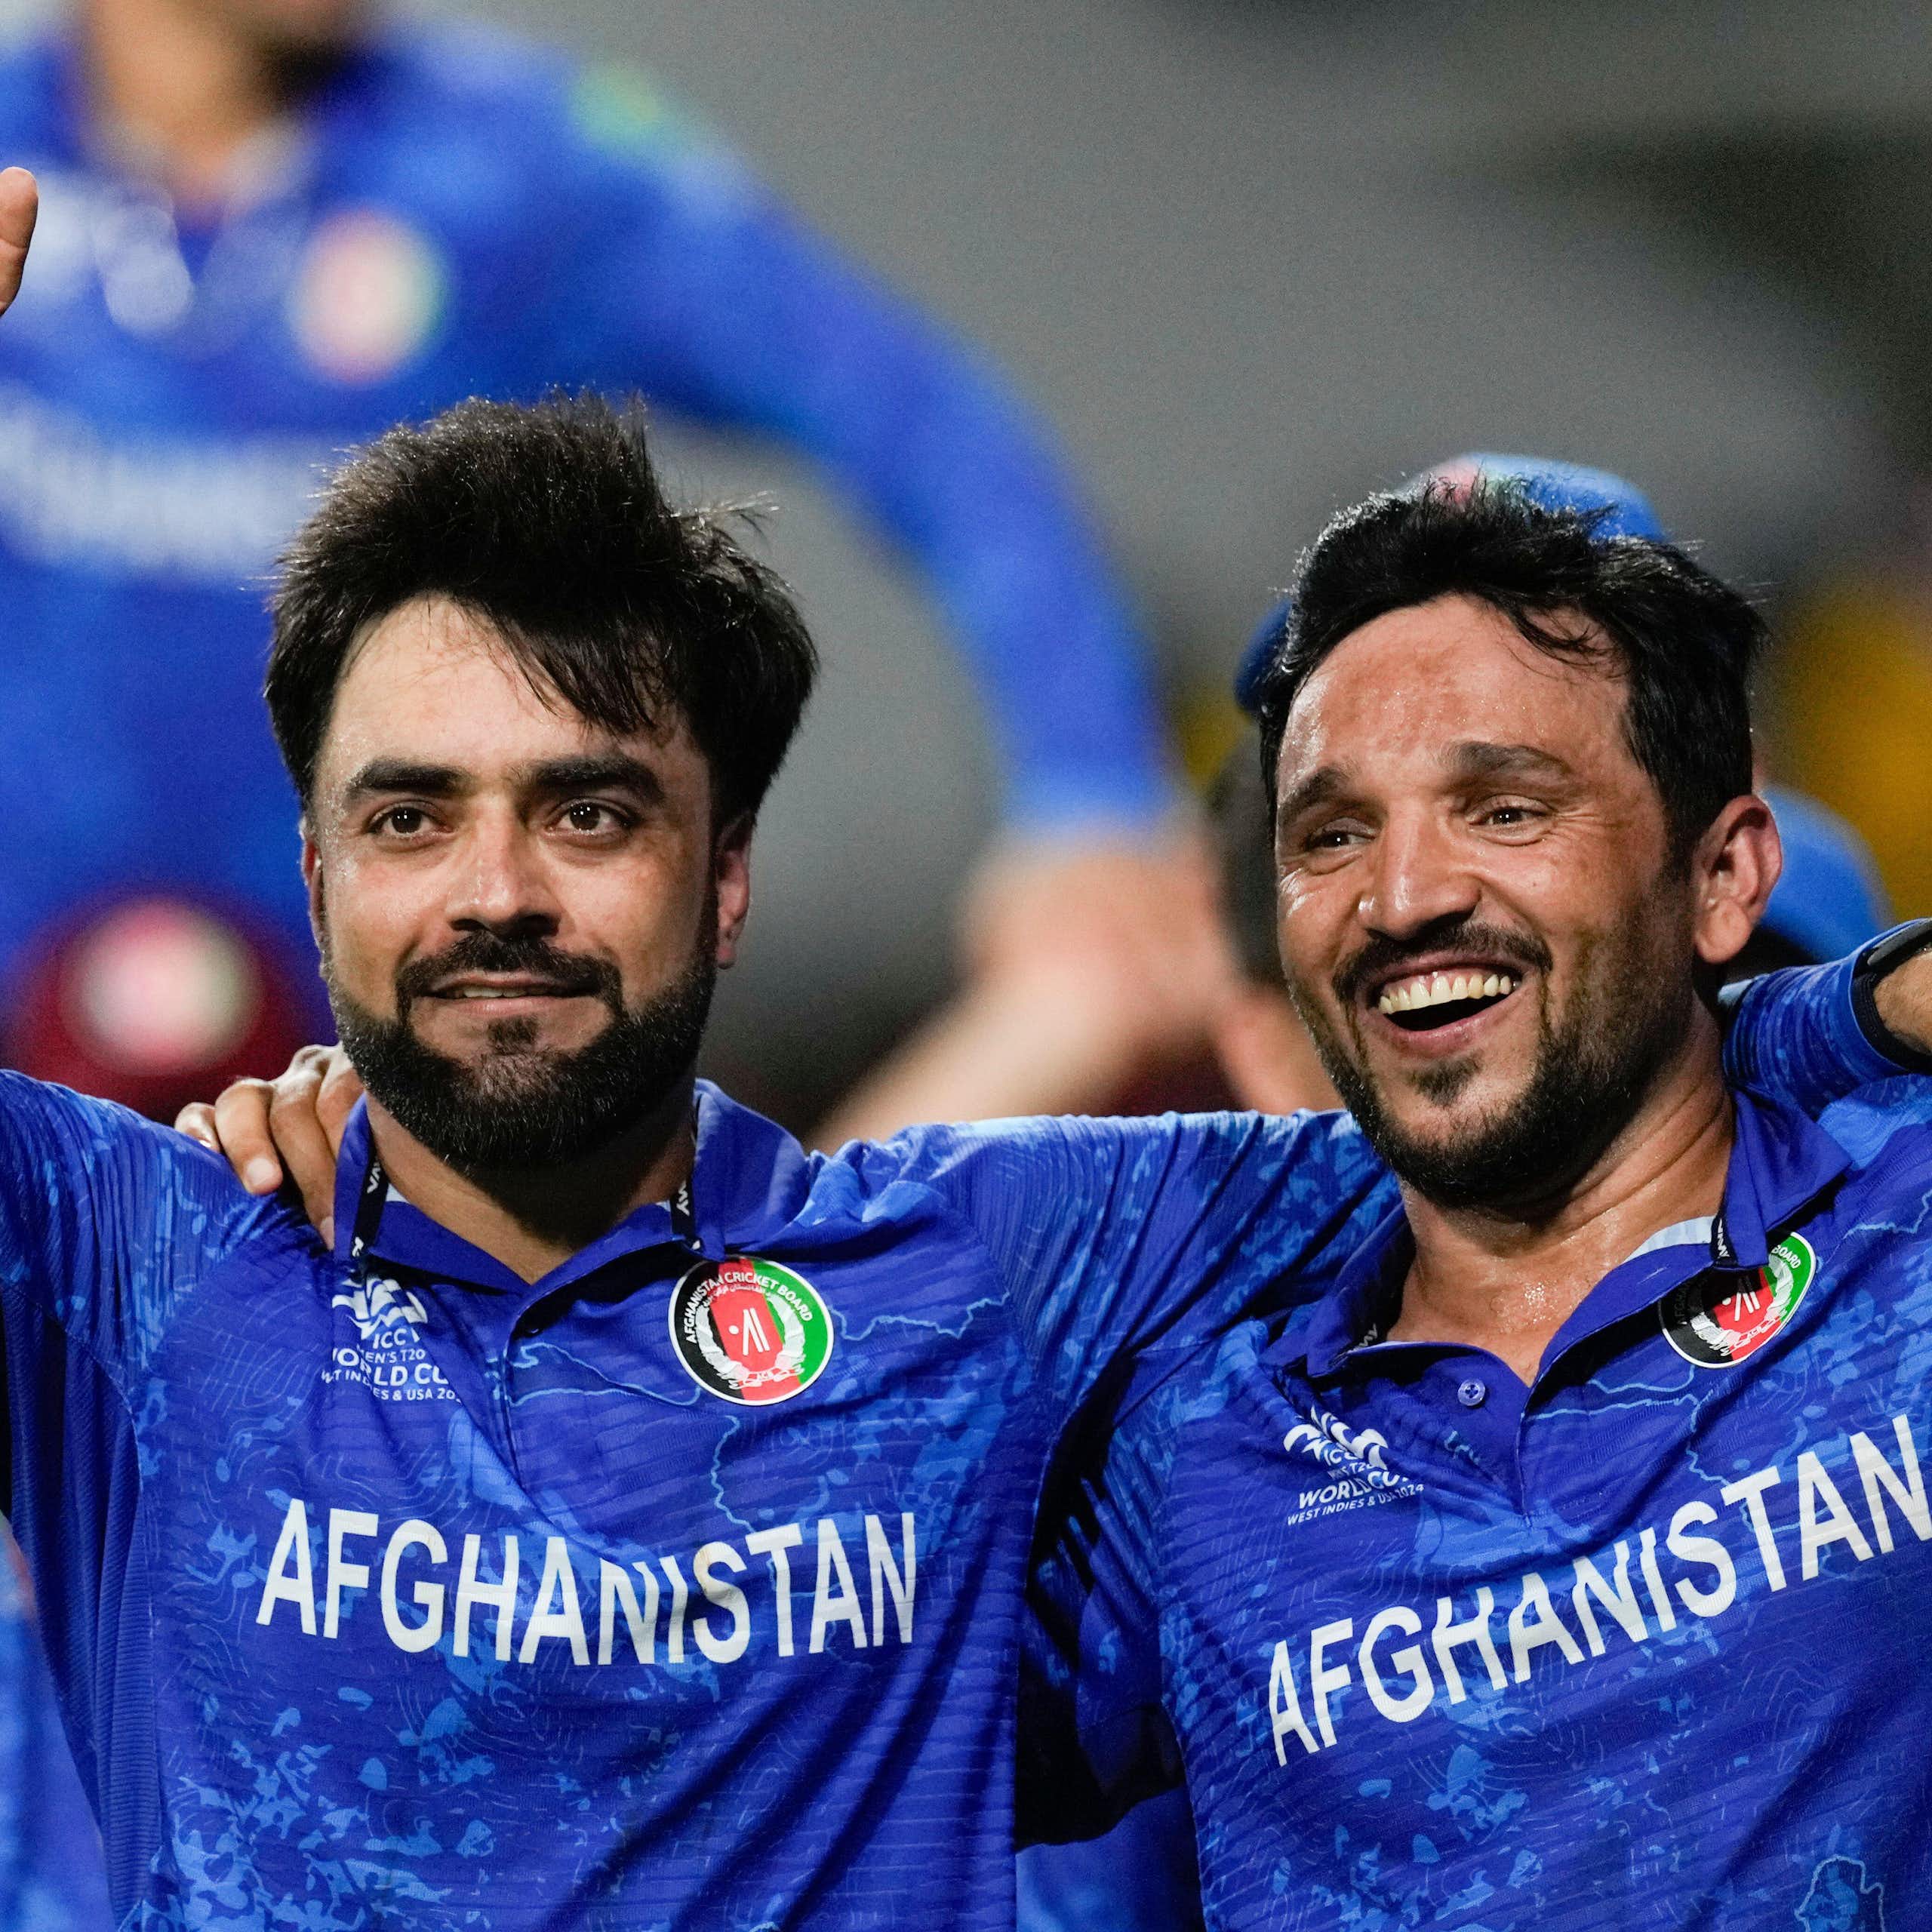 Two Afghan cricketers celebrate victory in the 20204 men's world cup